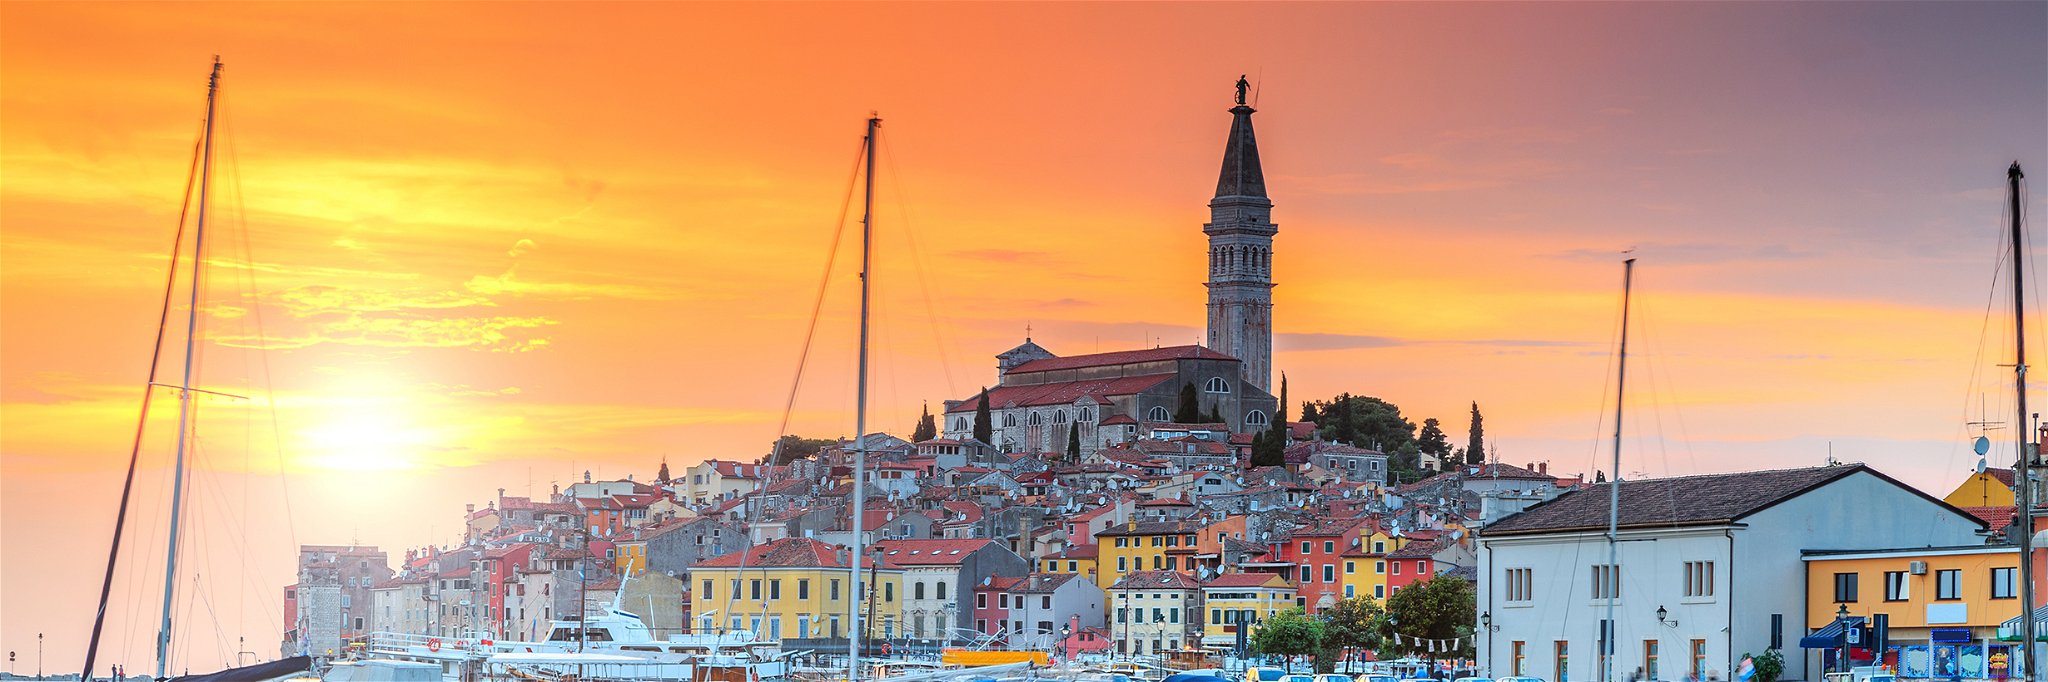 Rovinj is one of the most popular tourist resorts in Croatia.